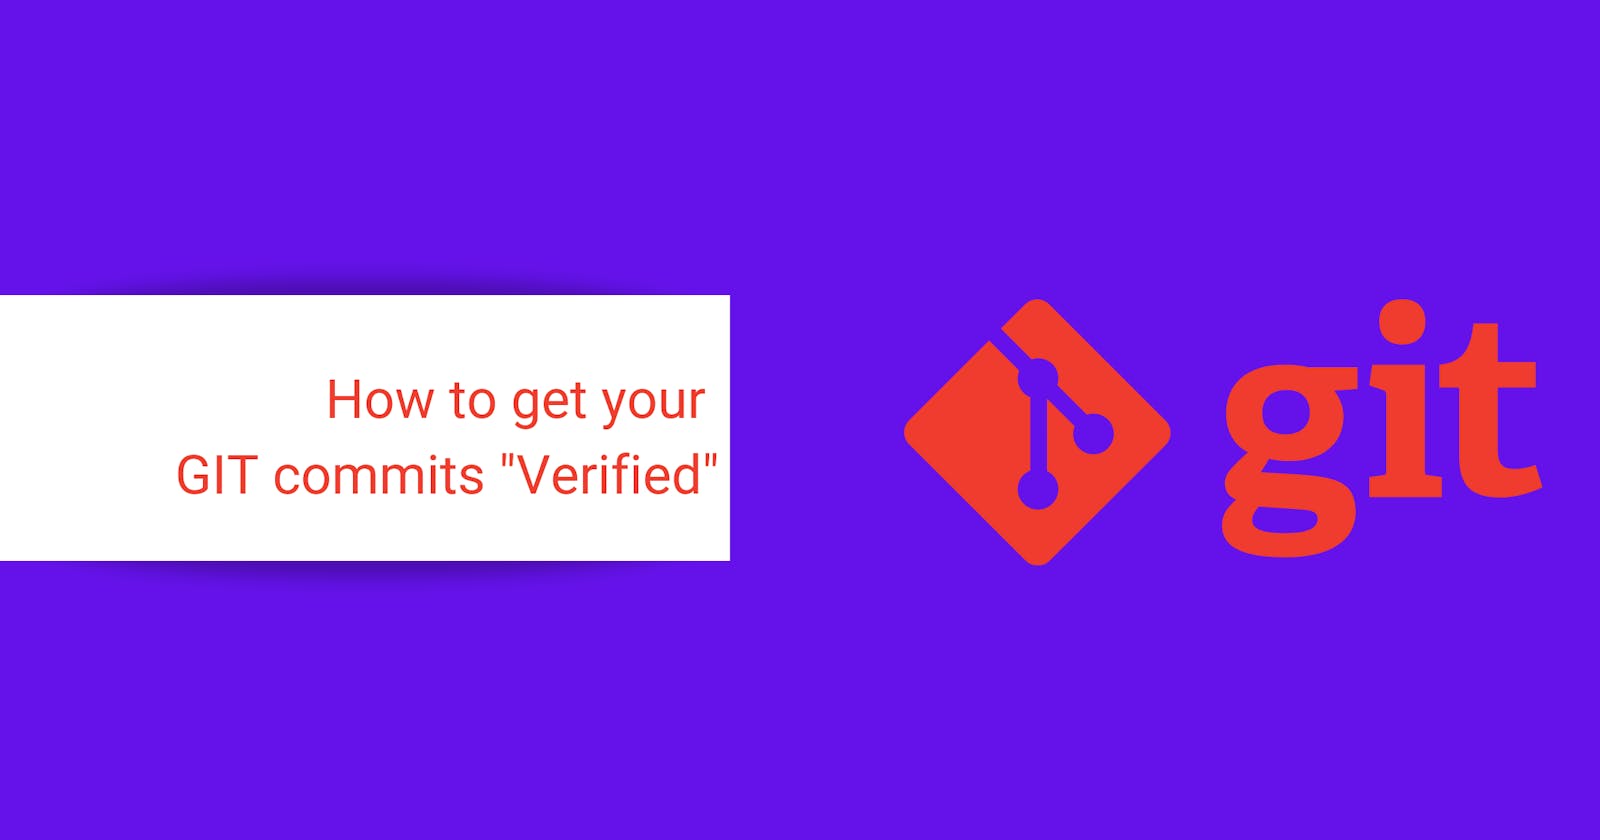 How to do "Verified" Commits with GIT